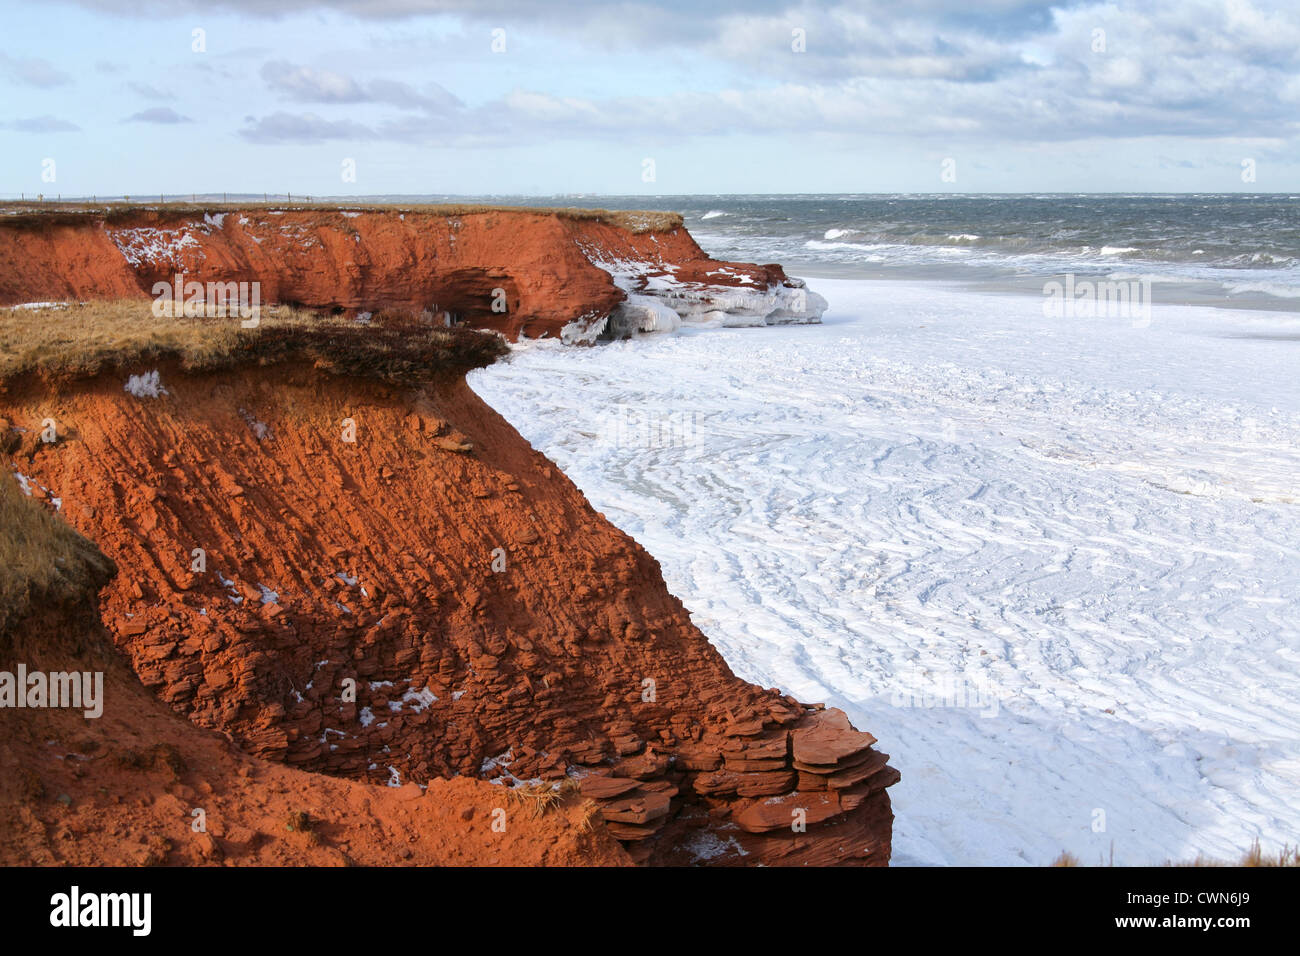 Red sandstone cliffs and moving ice flows in the ocean on the north shore of Prince Edward Island, Canada in winter. Stock Photo